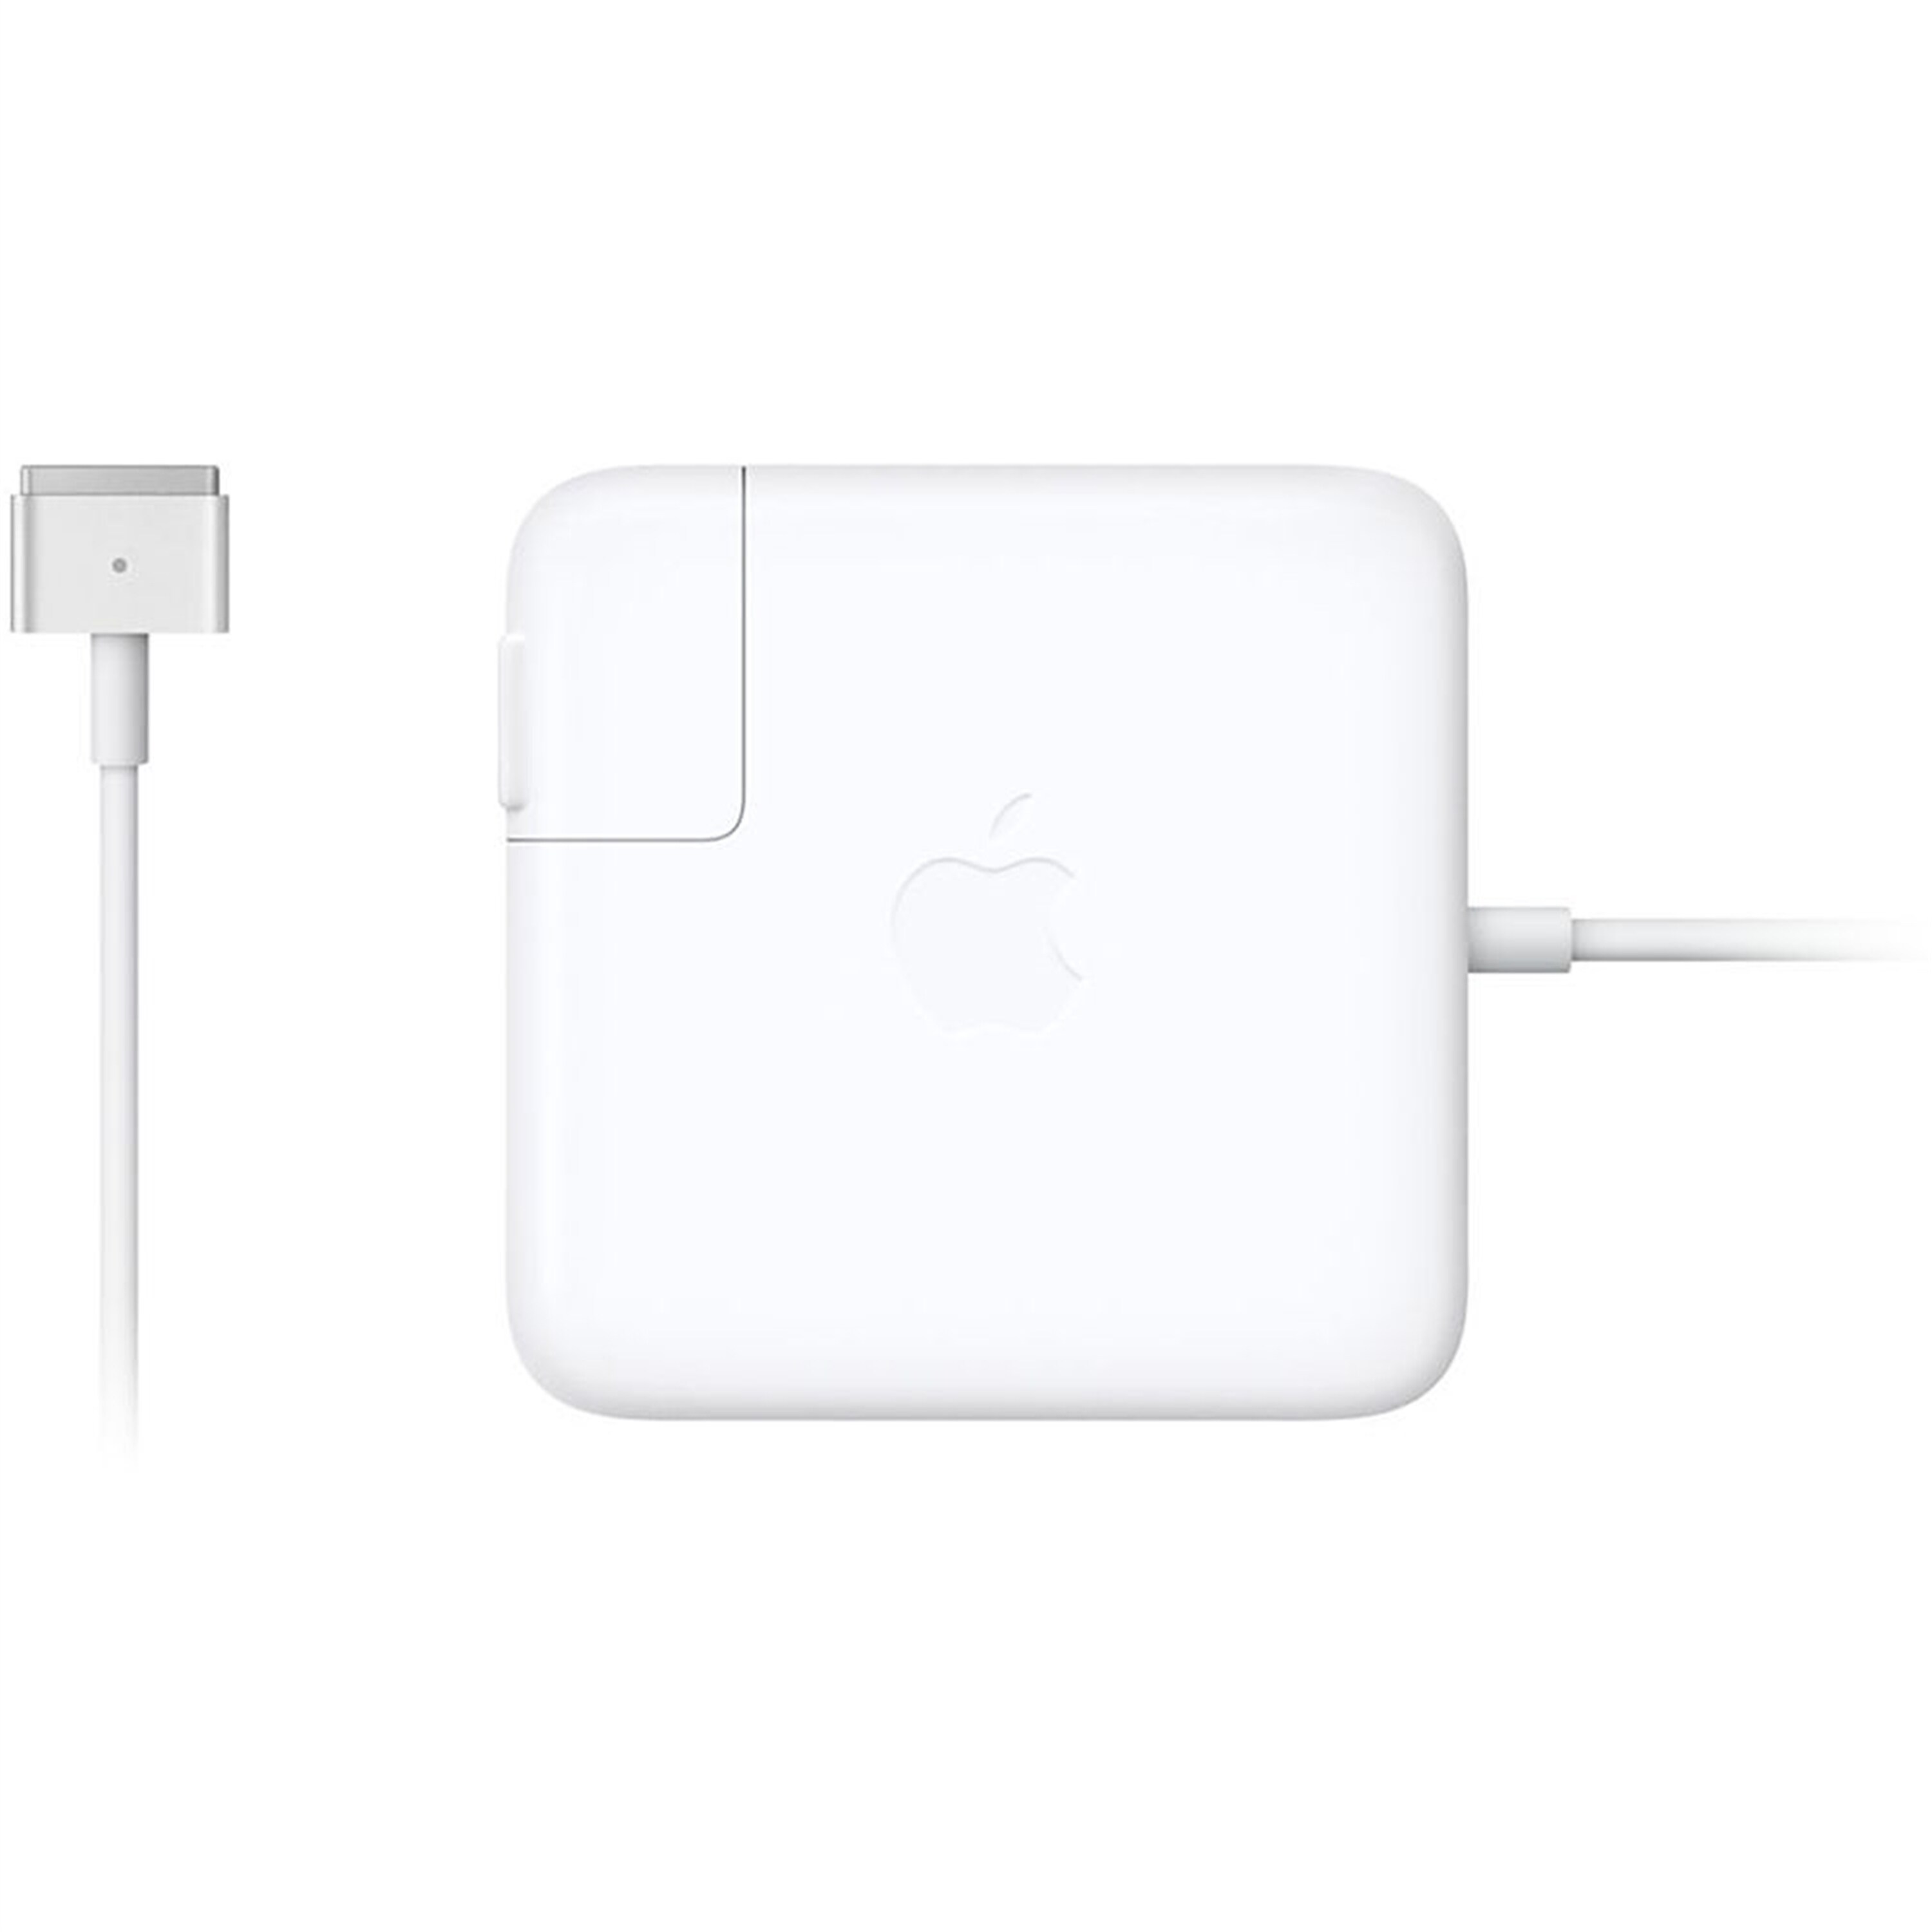 Apple 60W MagSafe 2 Power Adapter (MacBook Pro with 13-inch Retina display), White - Watts